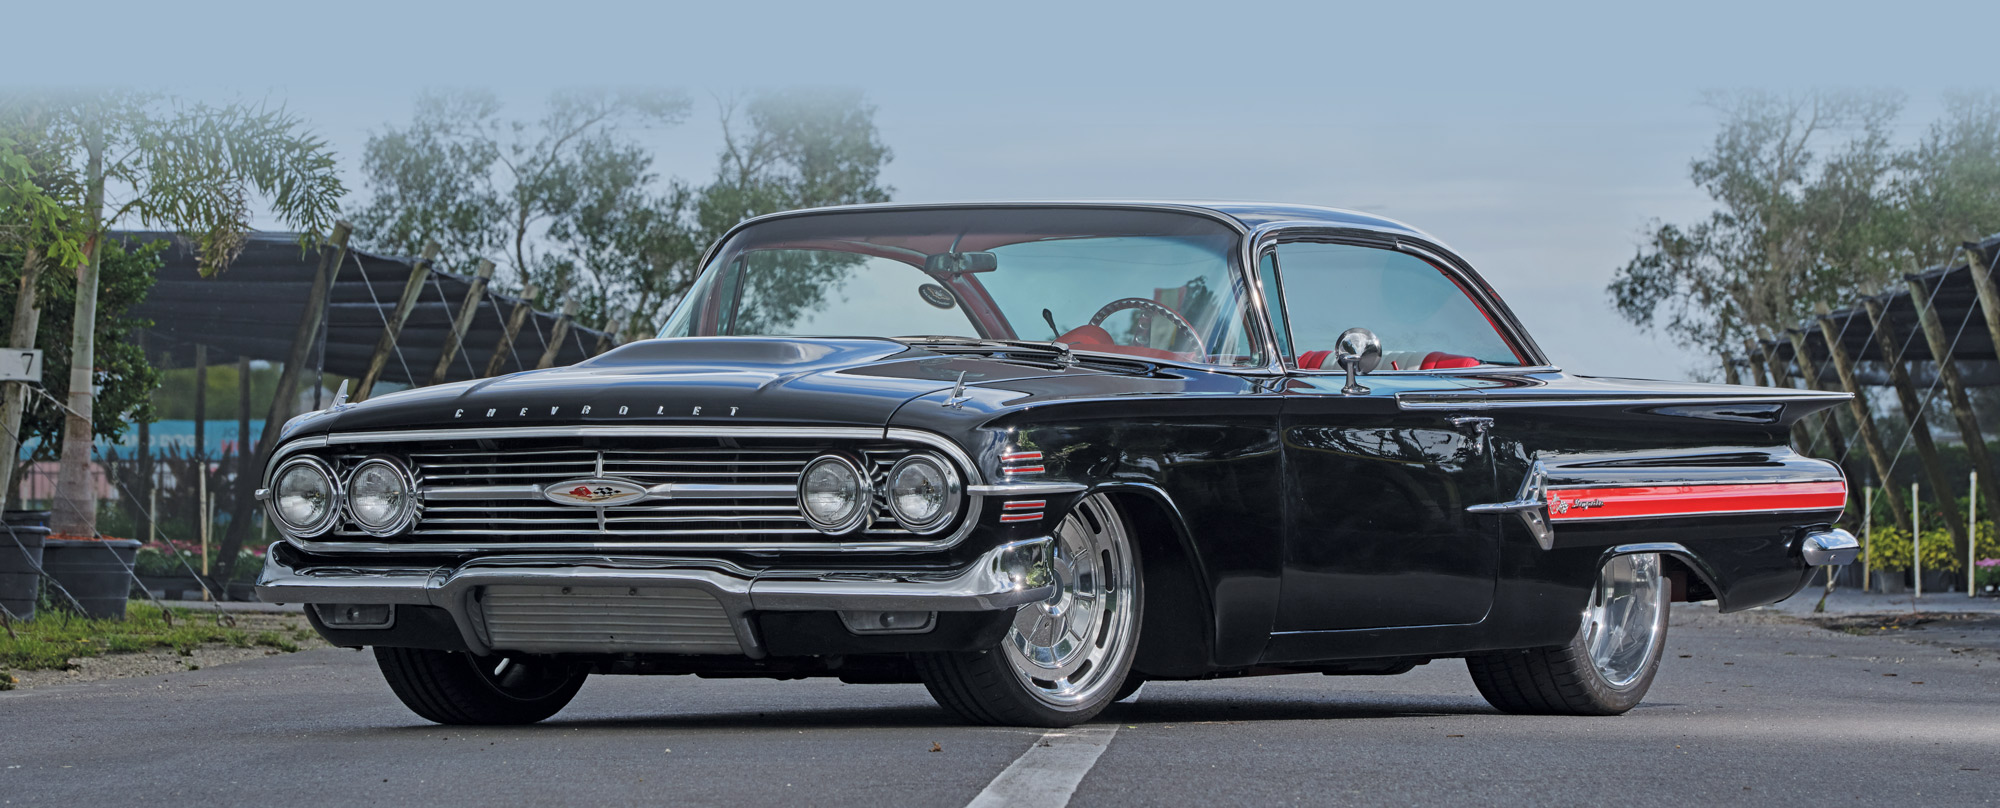 '60 Impala in Black and Red with powder blue sky behind